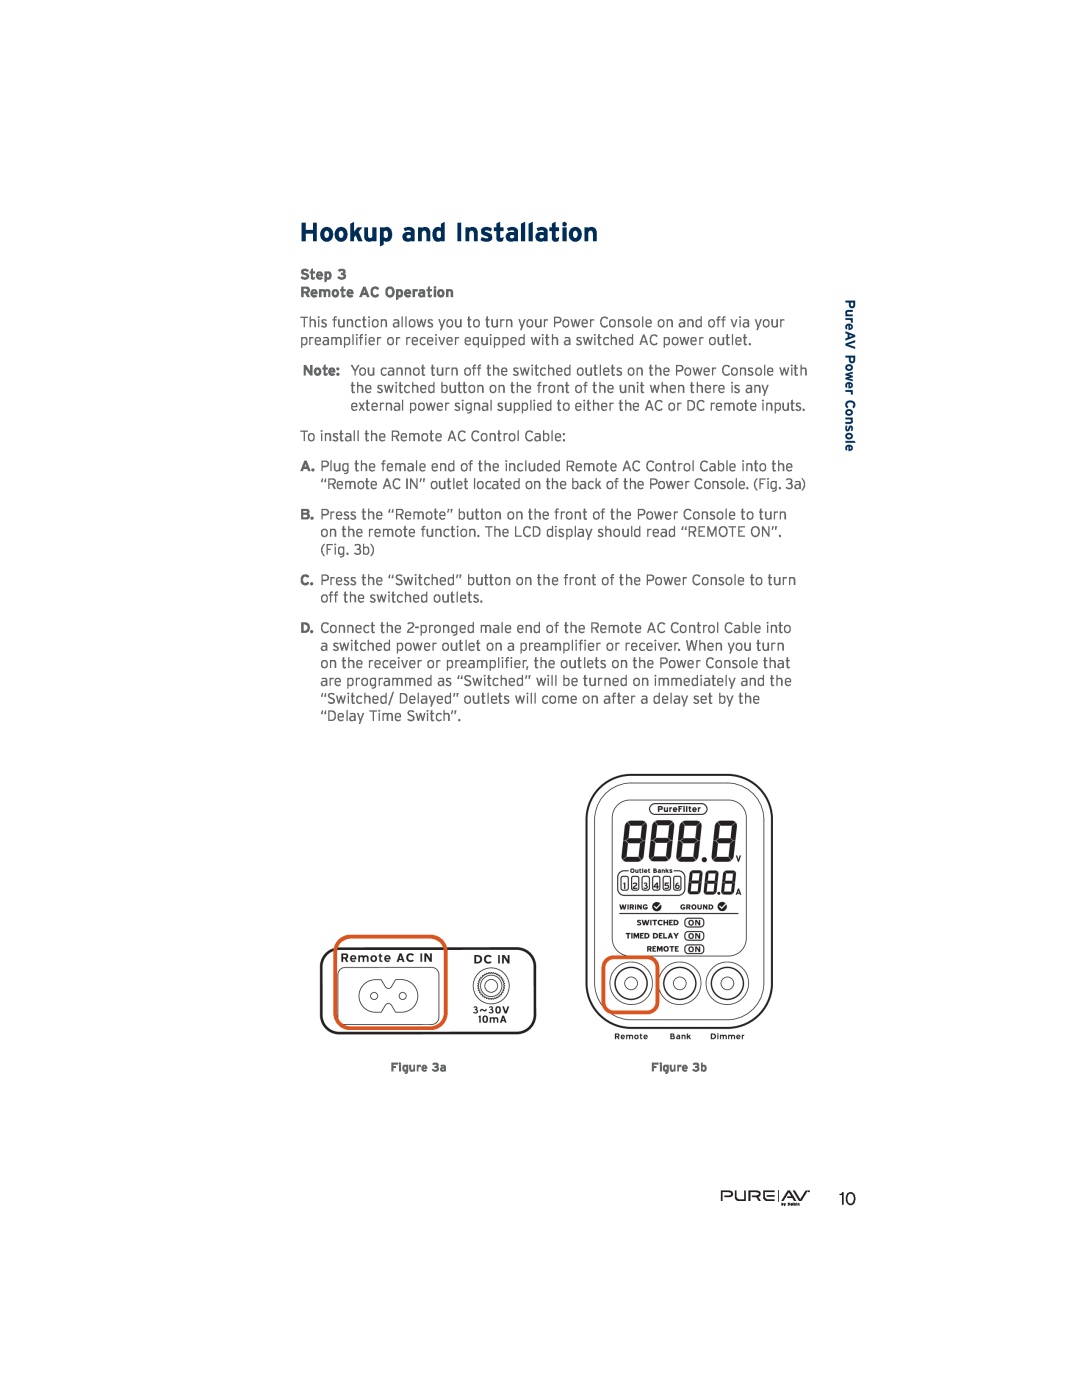 Belkin AP41300-12, PF60 user manual Step Remote AC Operation, Hookup and Installation, PureAV Power Console 